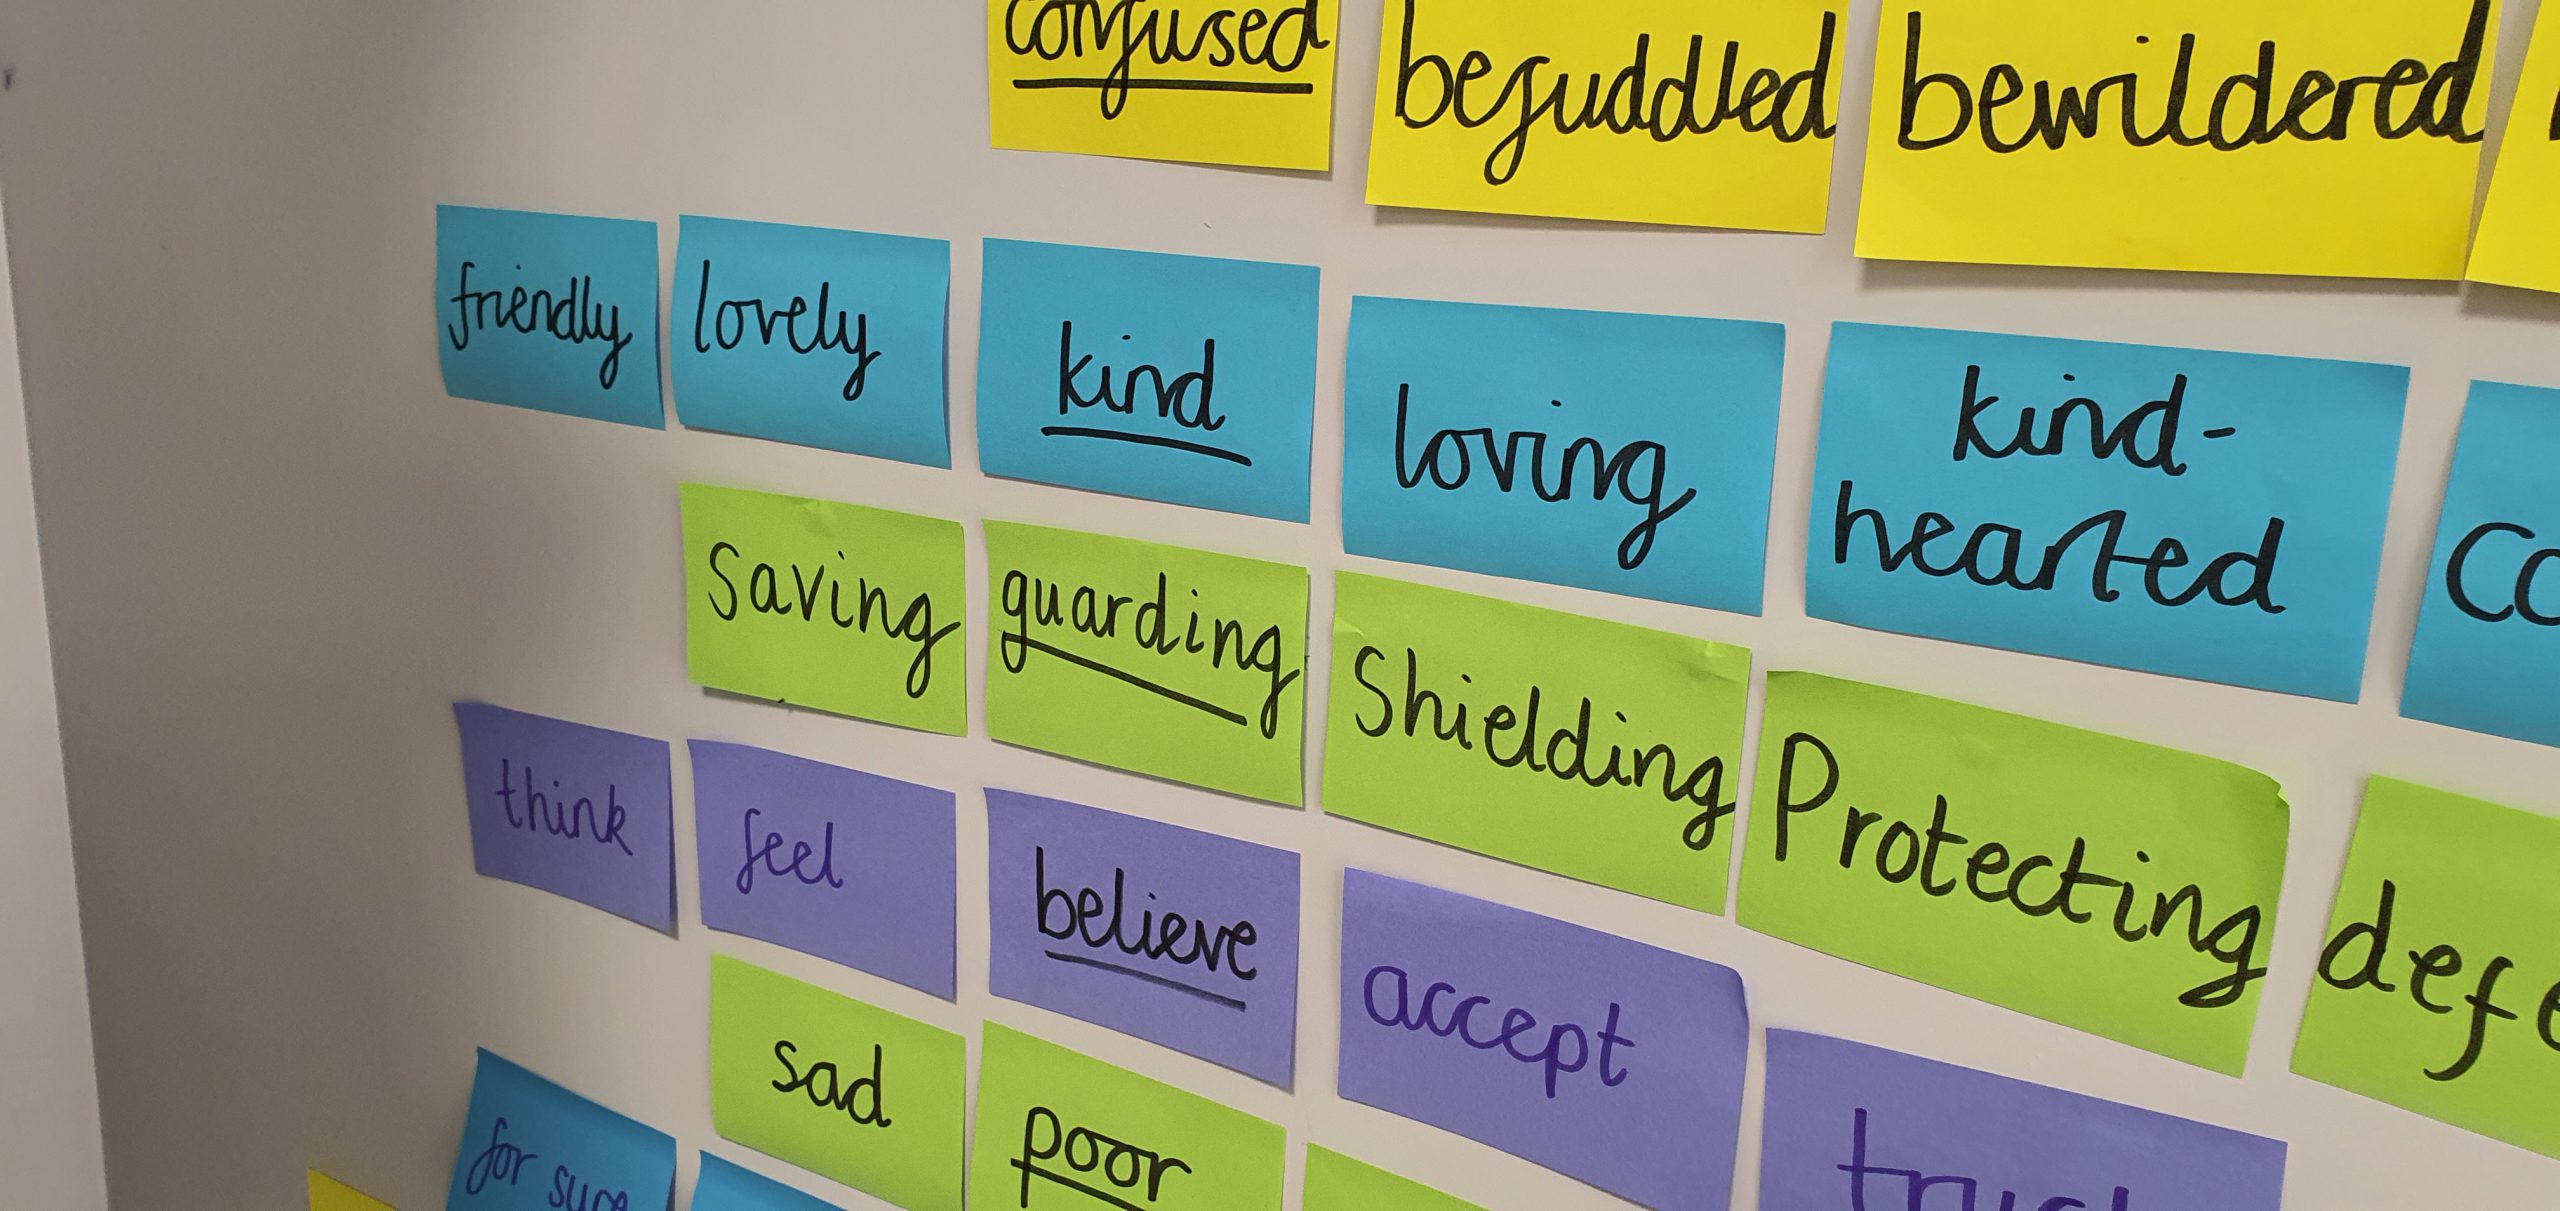 A picture of a noticeboard iwth post-it notes on with words from the dictionary on it.